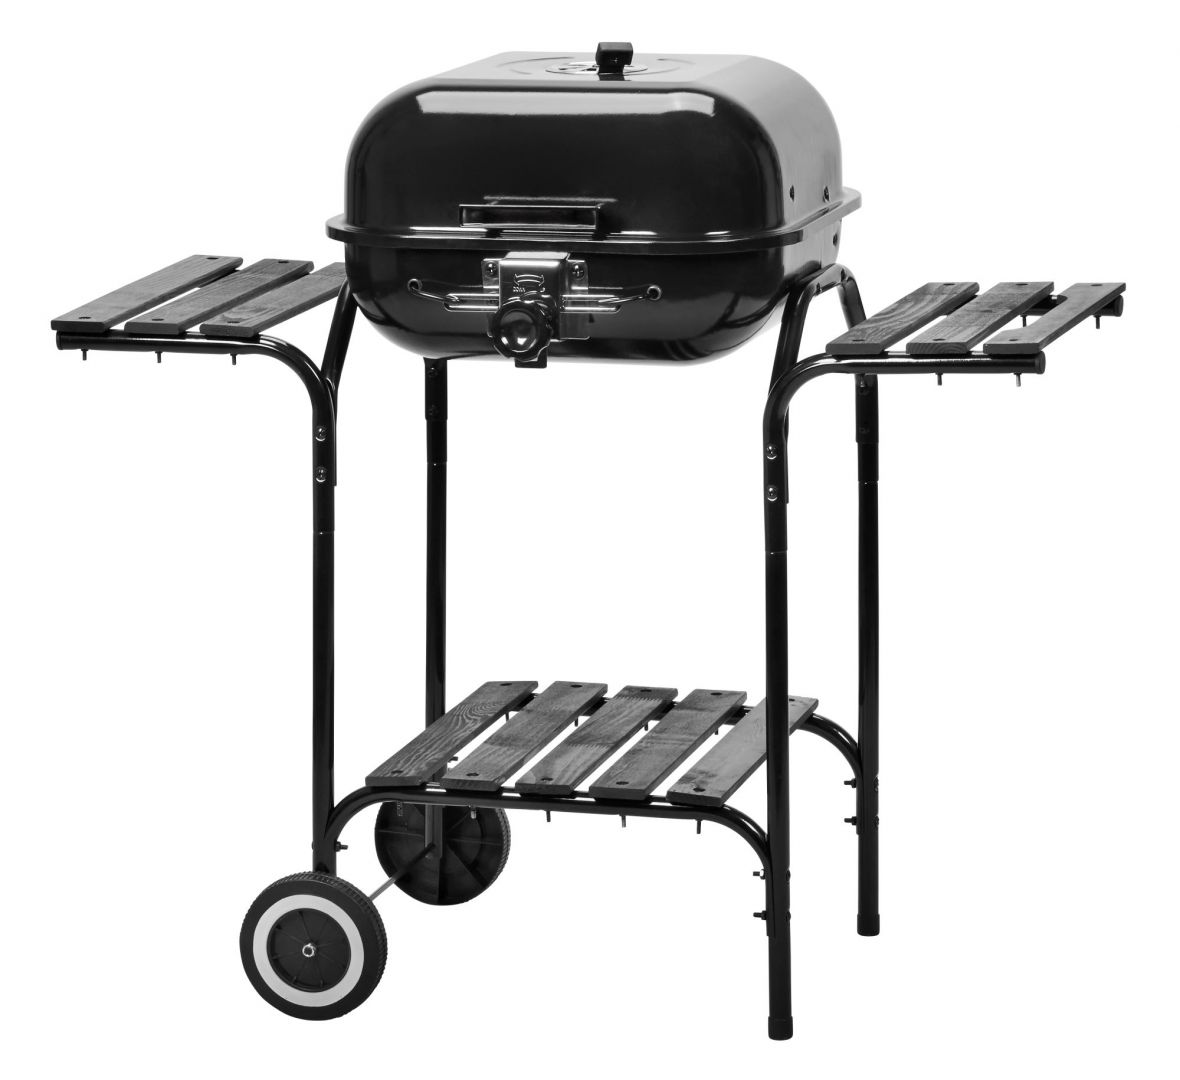 Parking grill